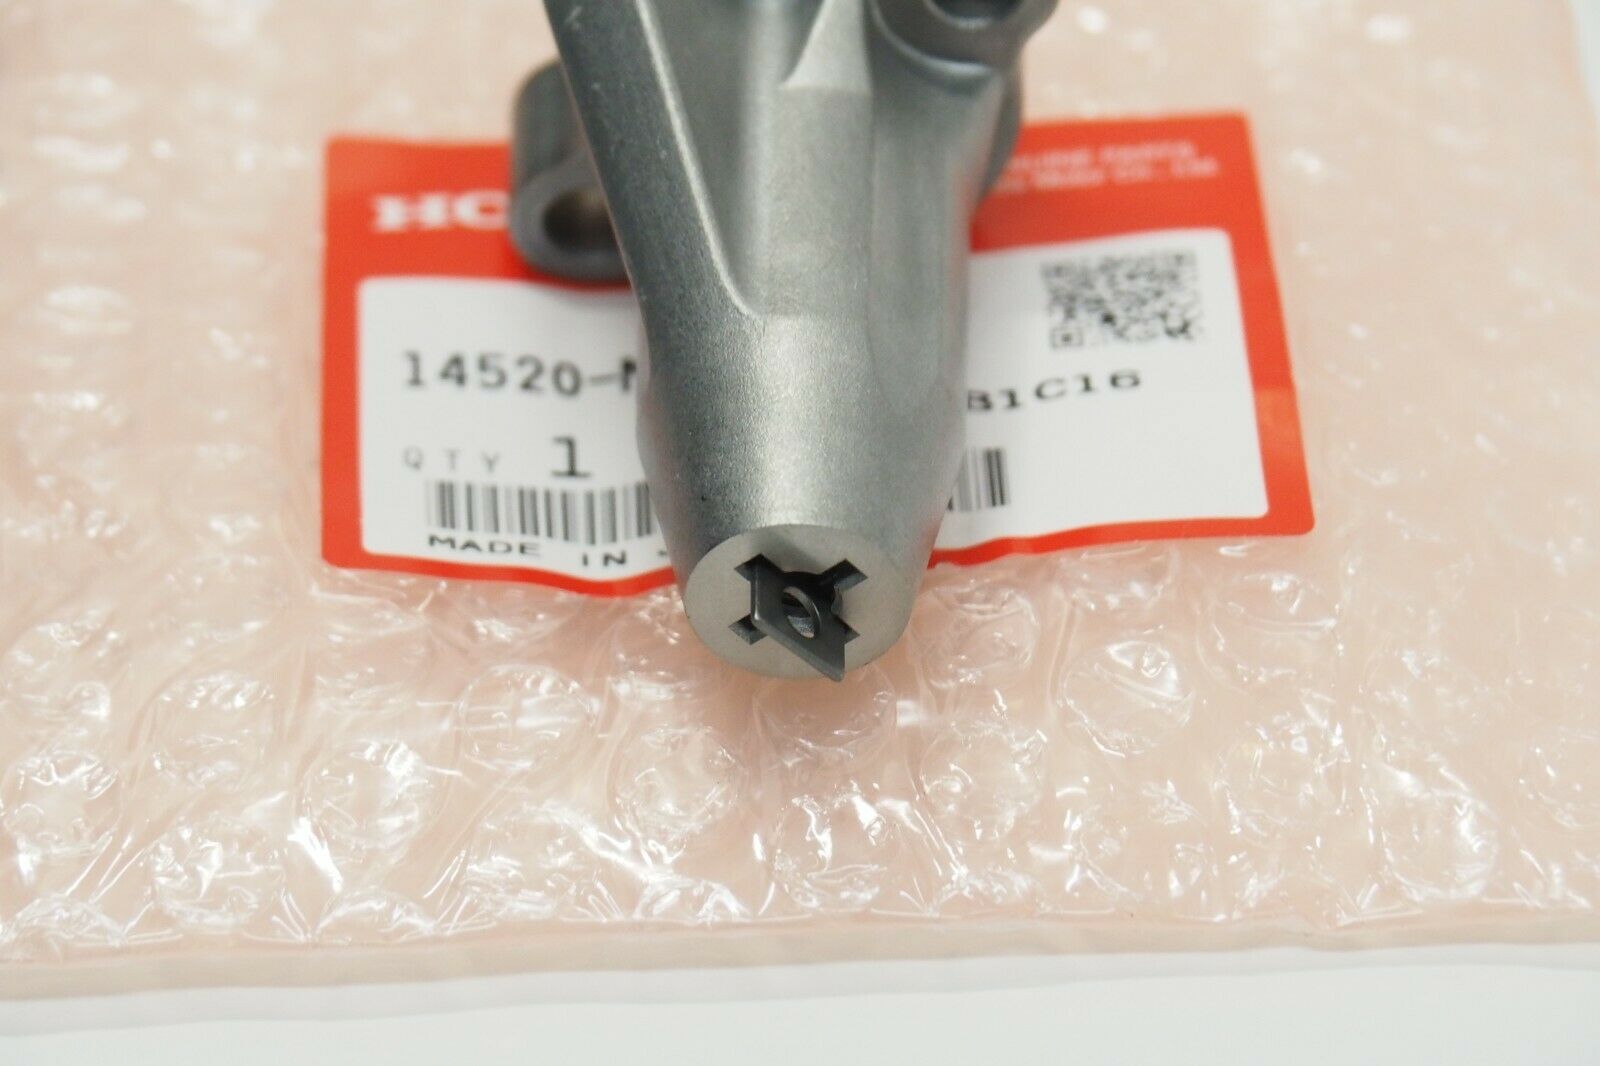 Honda Genuine 2003-2015 CBR600RR RA Cam Chain Tensioner with Gasket 14520-MEE-013 ★